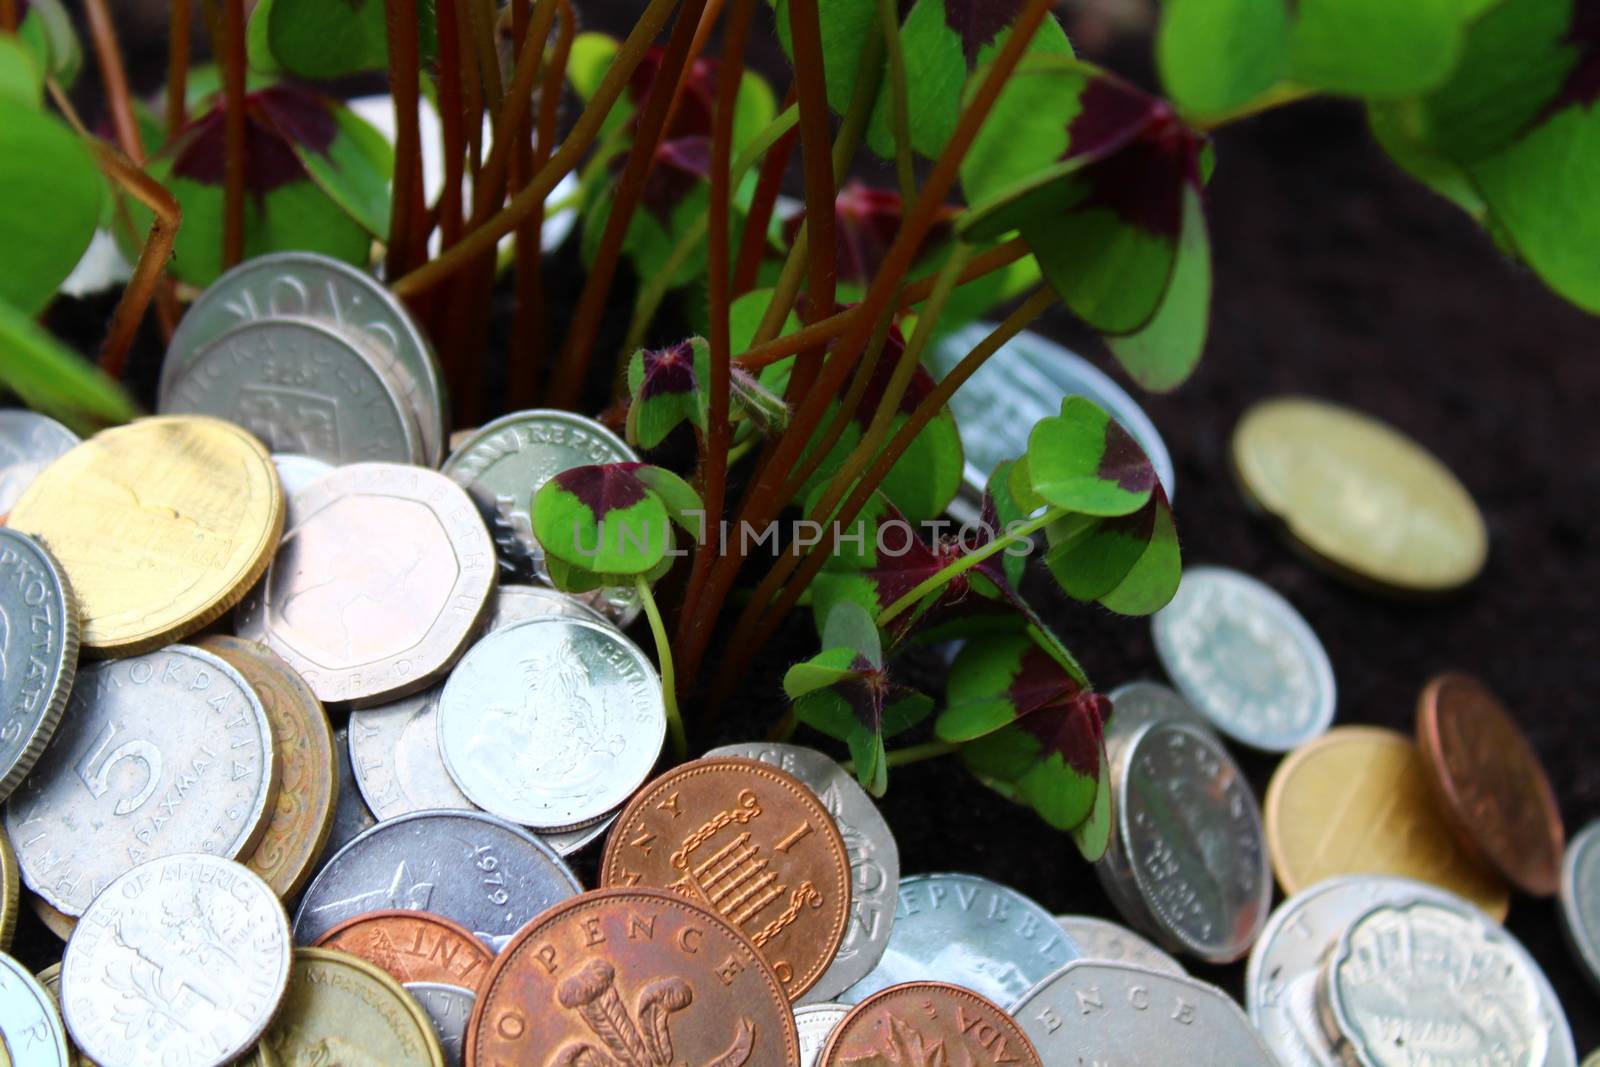 The picture shows coins from foreign countries and lucky clover